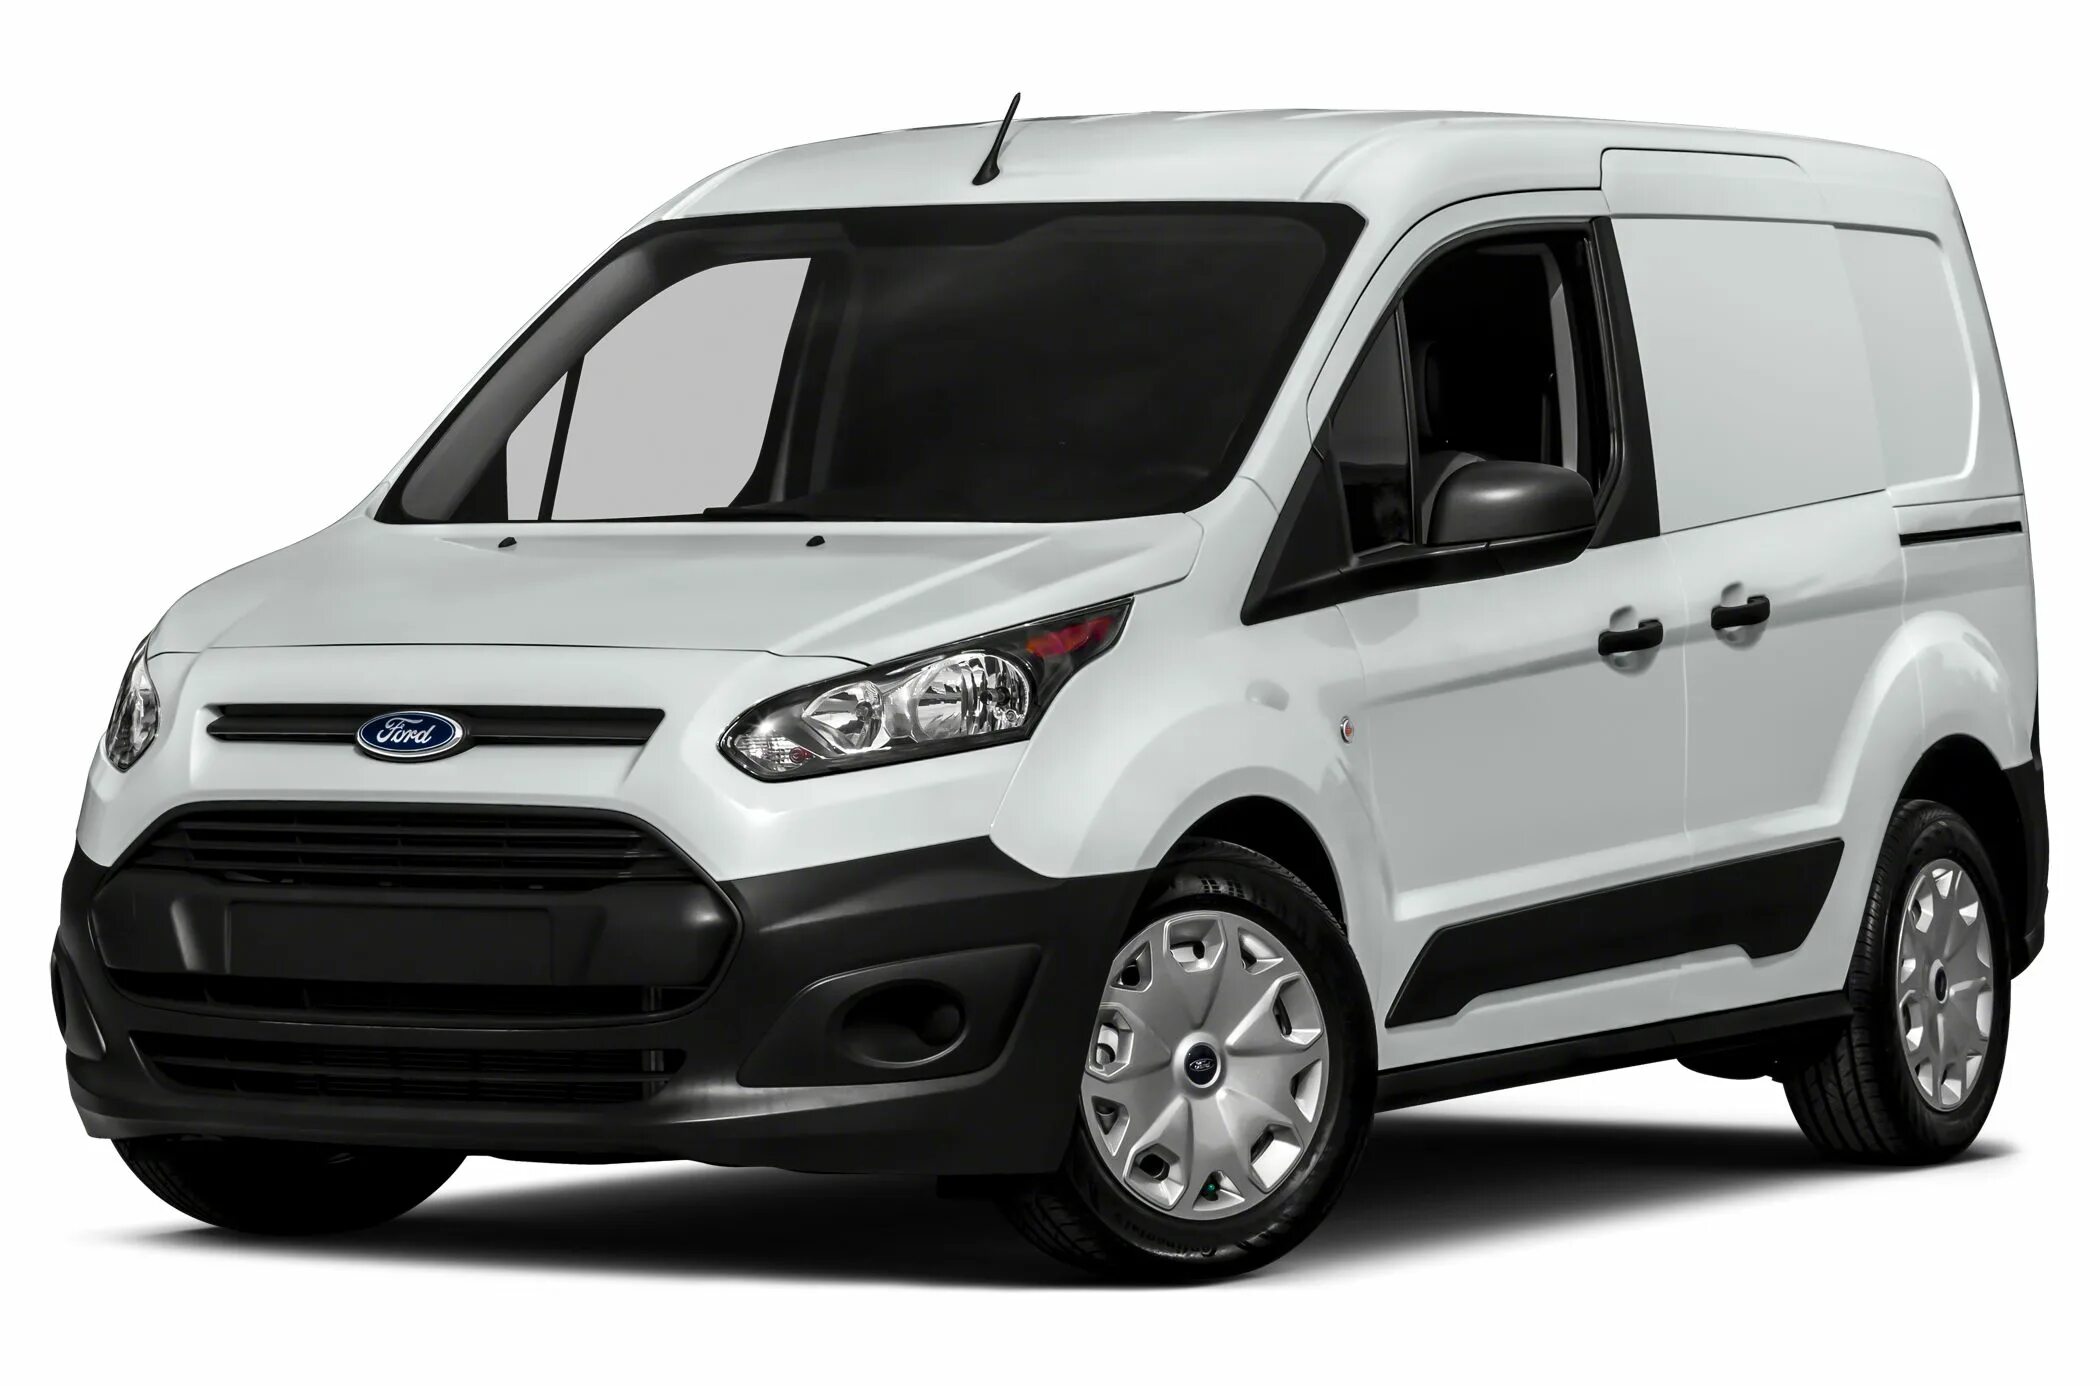 Connect машина. Ford Tourneo connect 2015. Ford Tourneo connect 2012. Ford Transit connect 2013. Ford Transit 2014.